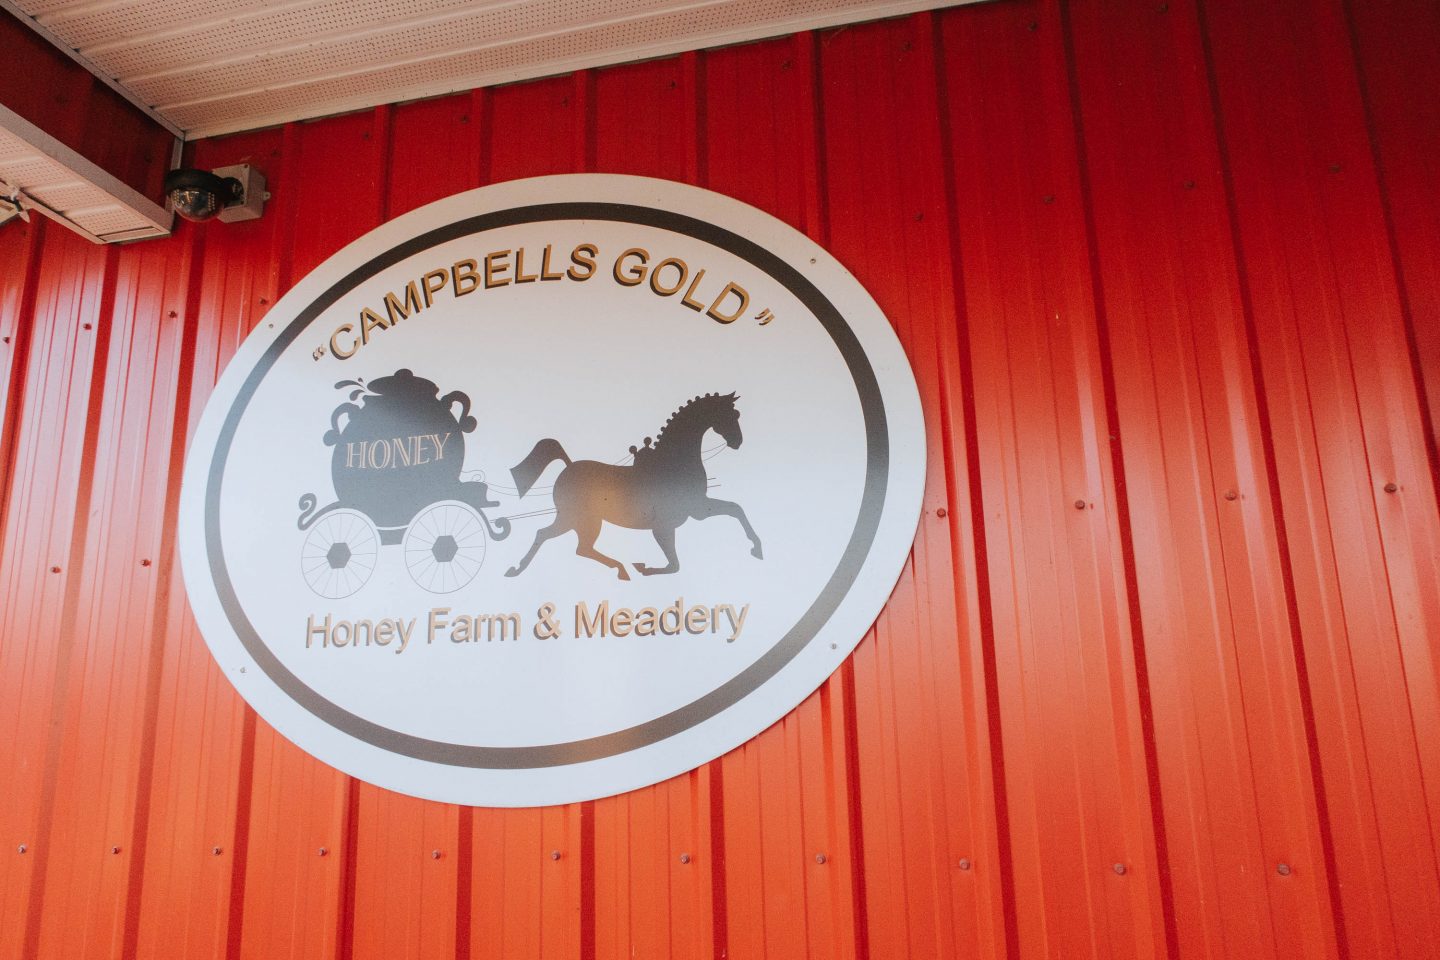 So many types of honey at Campbell’s Gold and Honey Meadery 